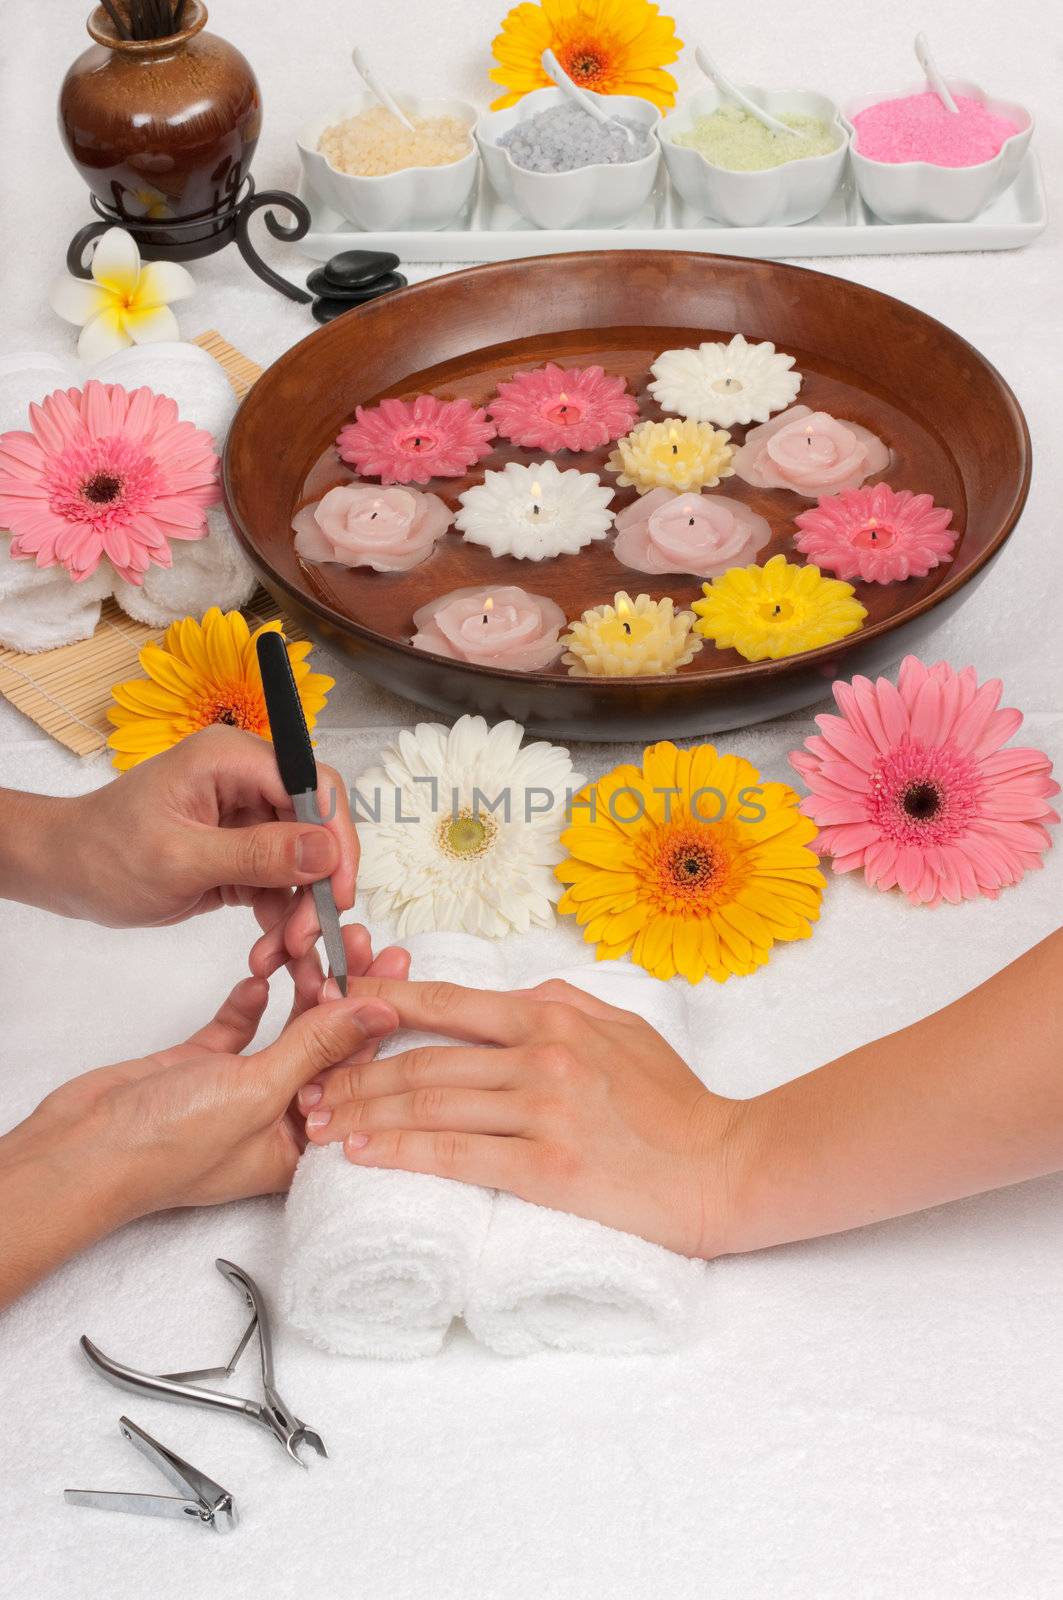 Manicure Spa by BVDC